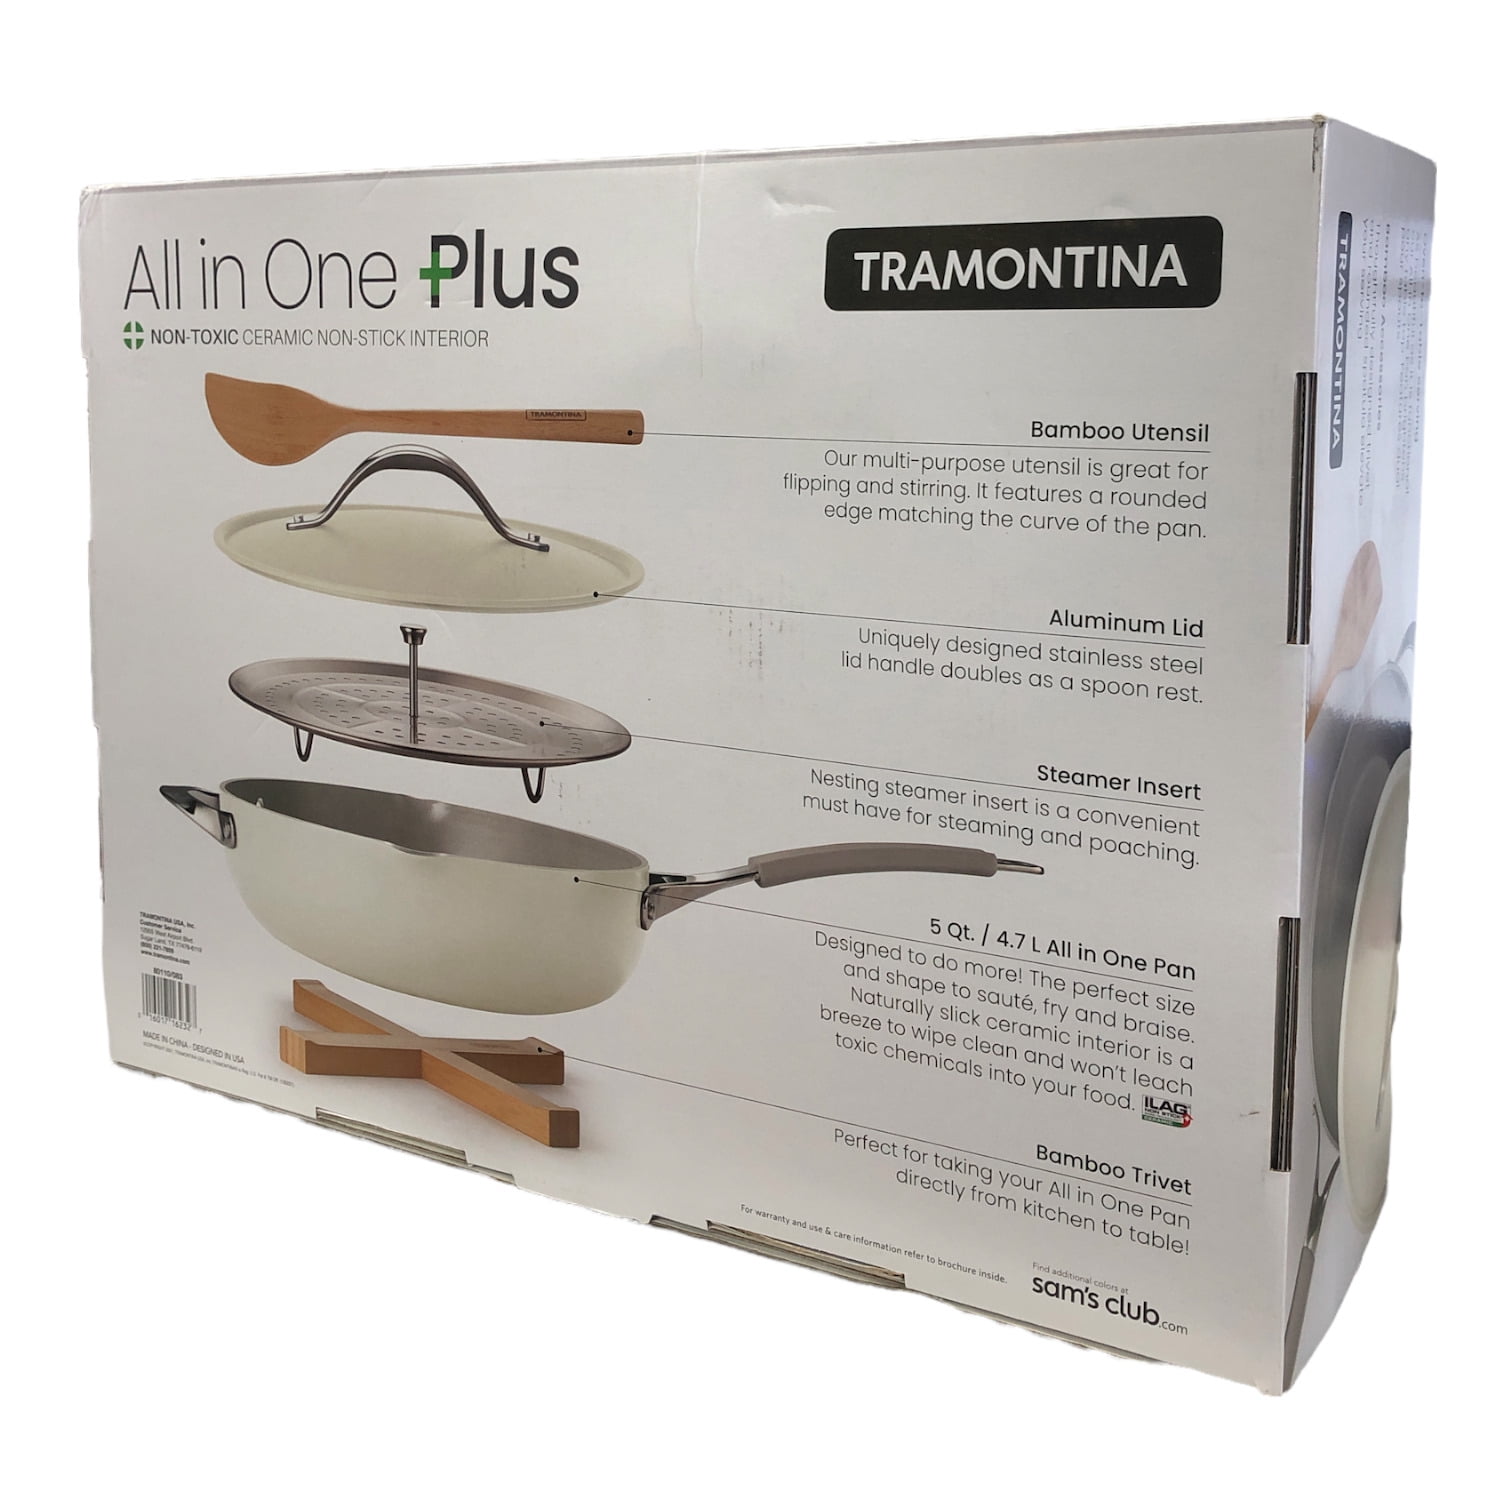 Tramontina All in One Plus Charcoal Grey 5 Piece Set